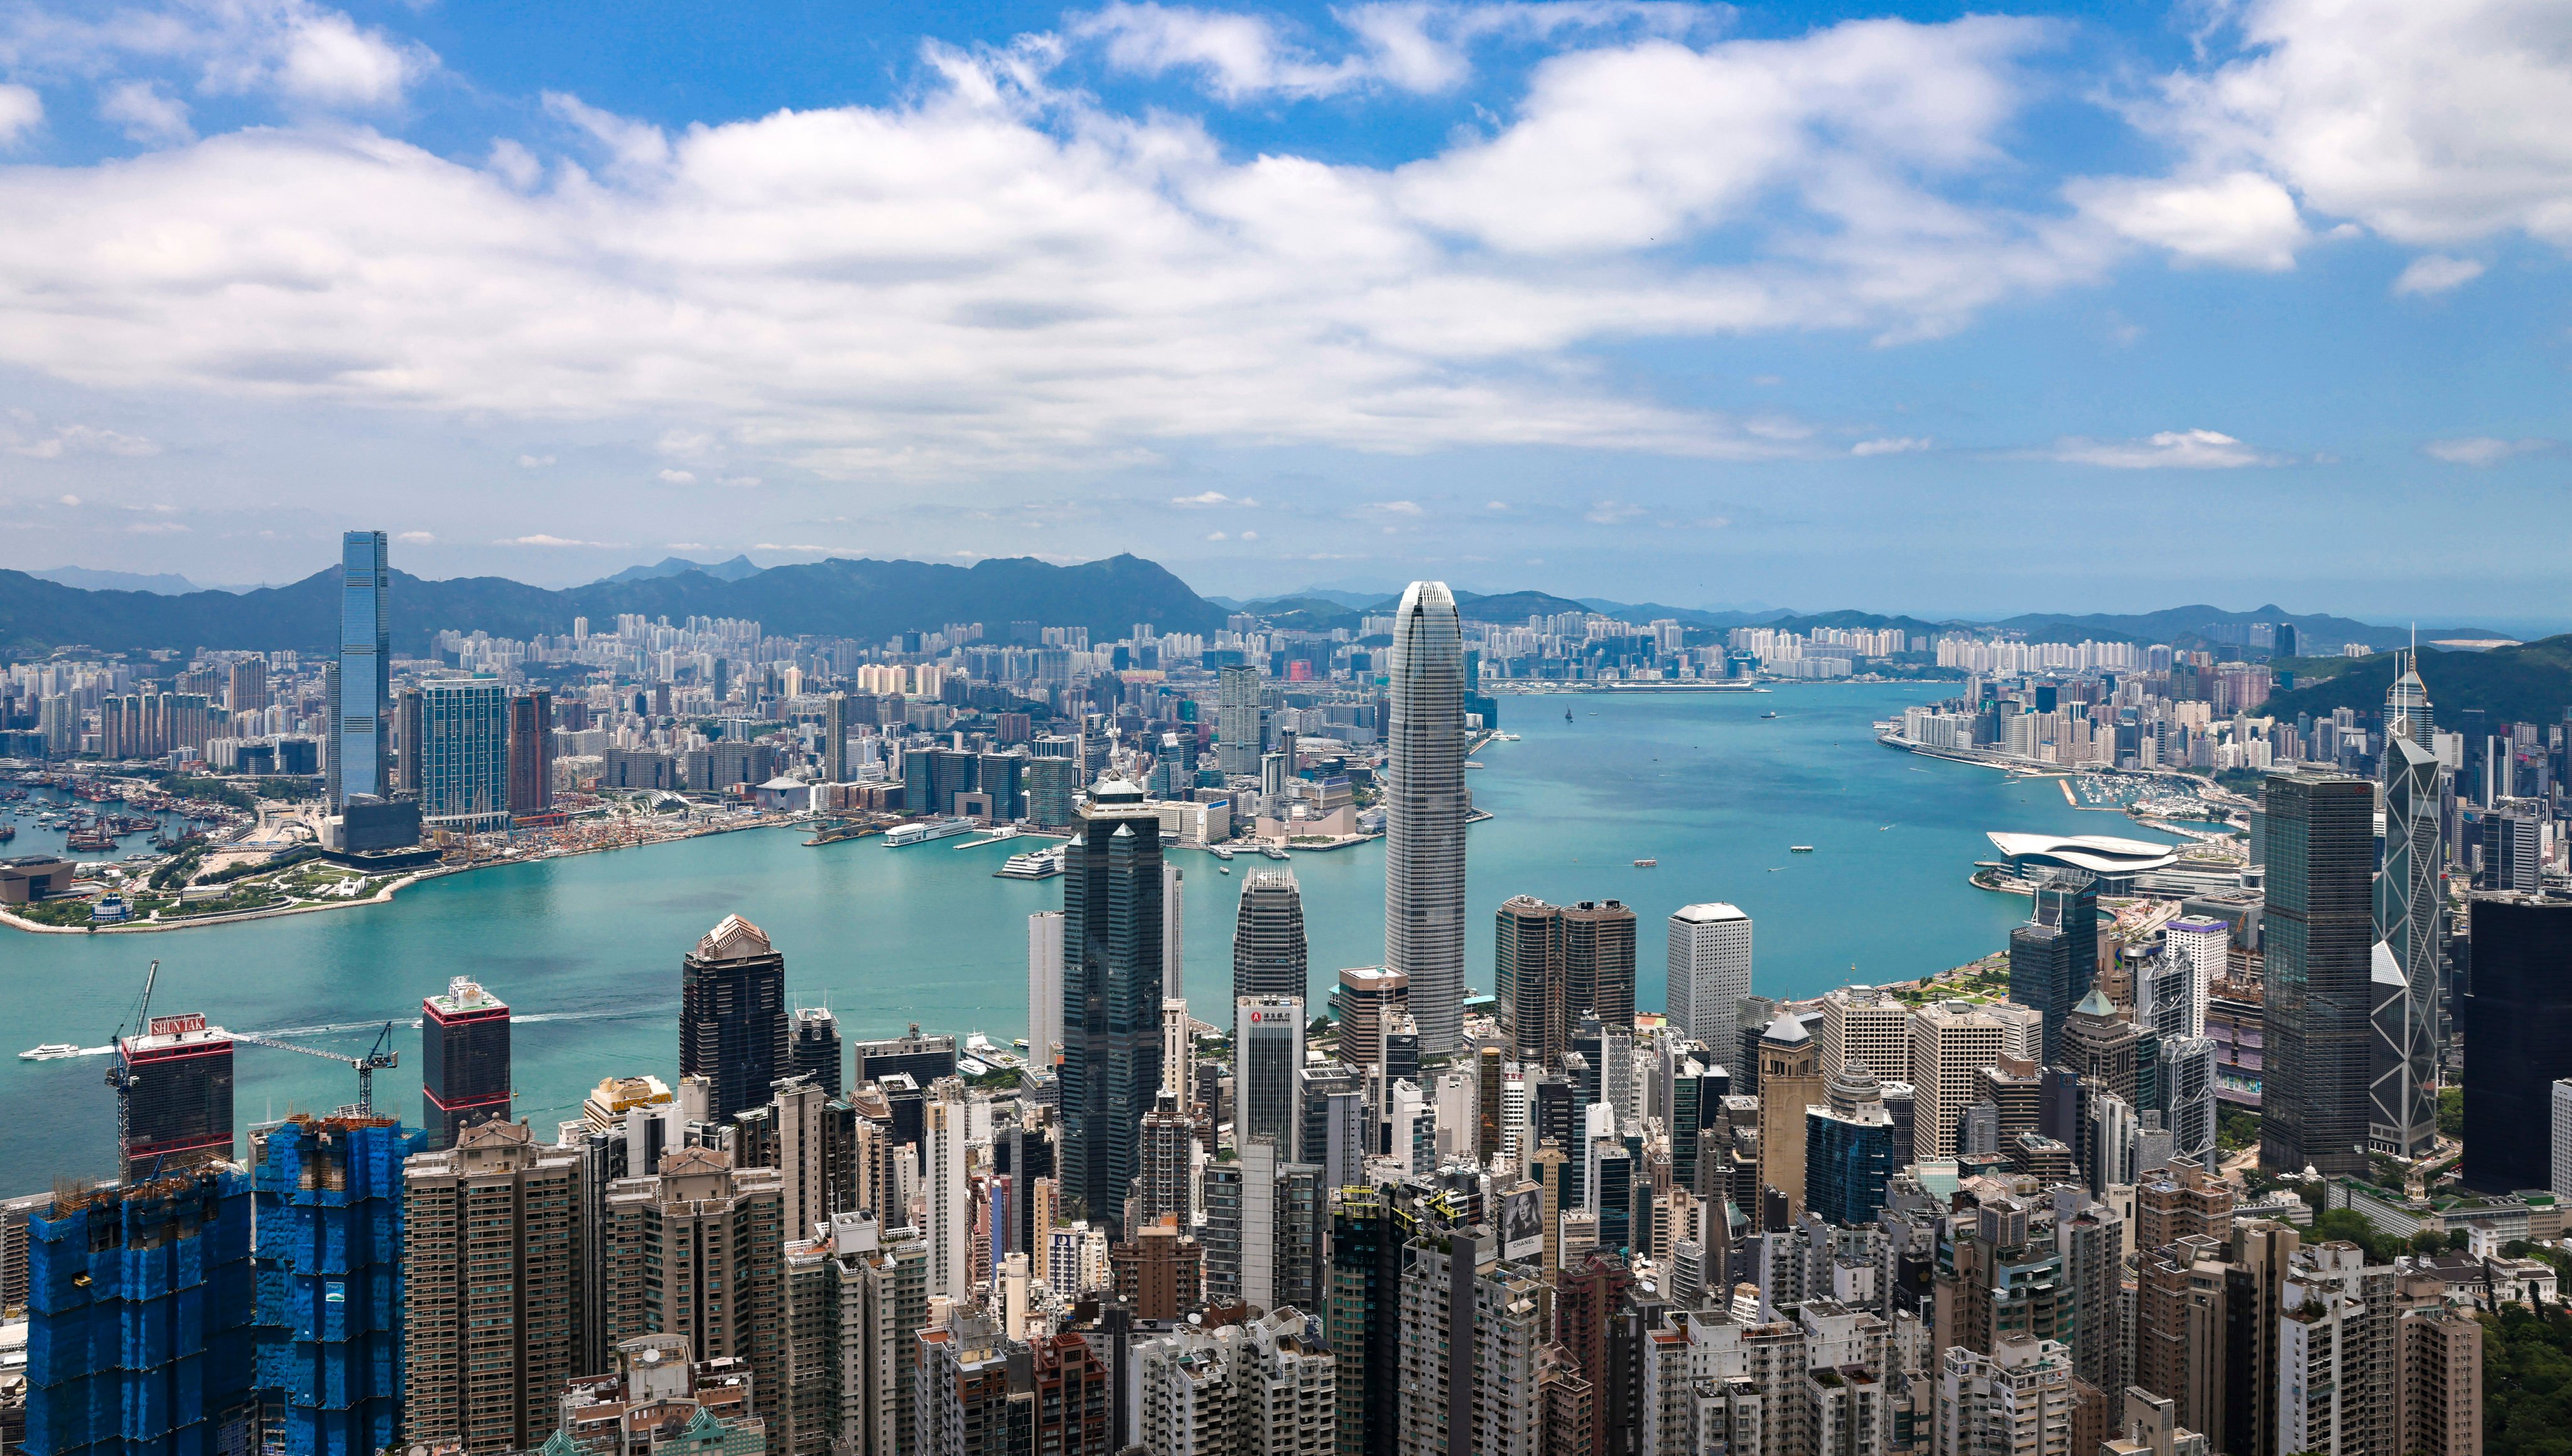 Hong Kong will host a meeting of the Apec Business Advisory Council from April 22 to 25. Photo: K. Y. Cheng